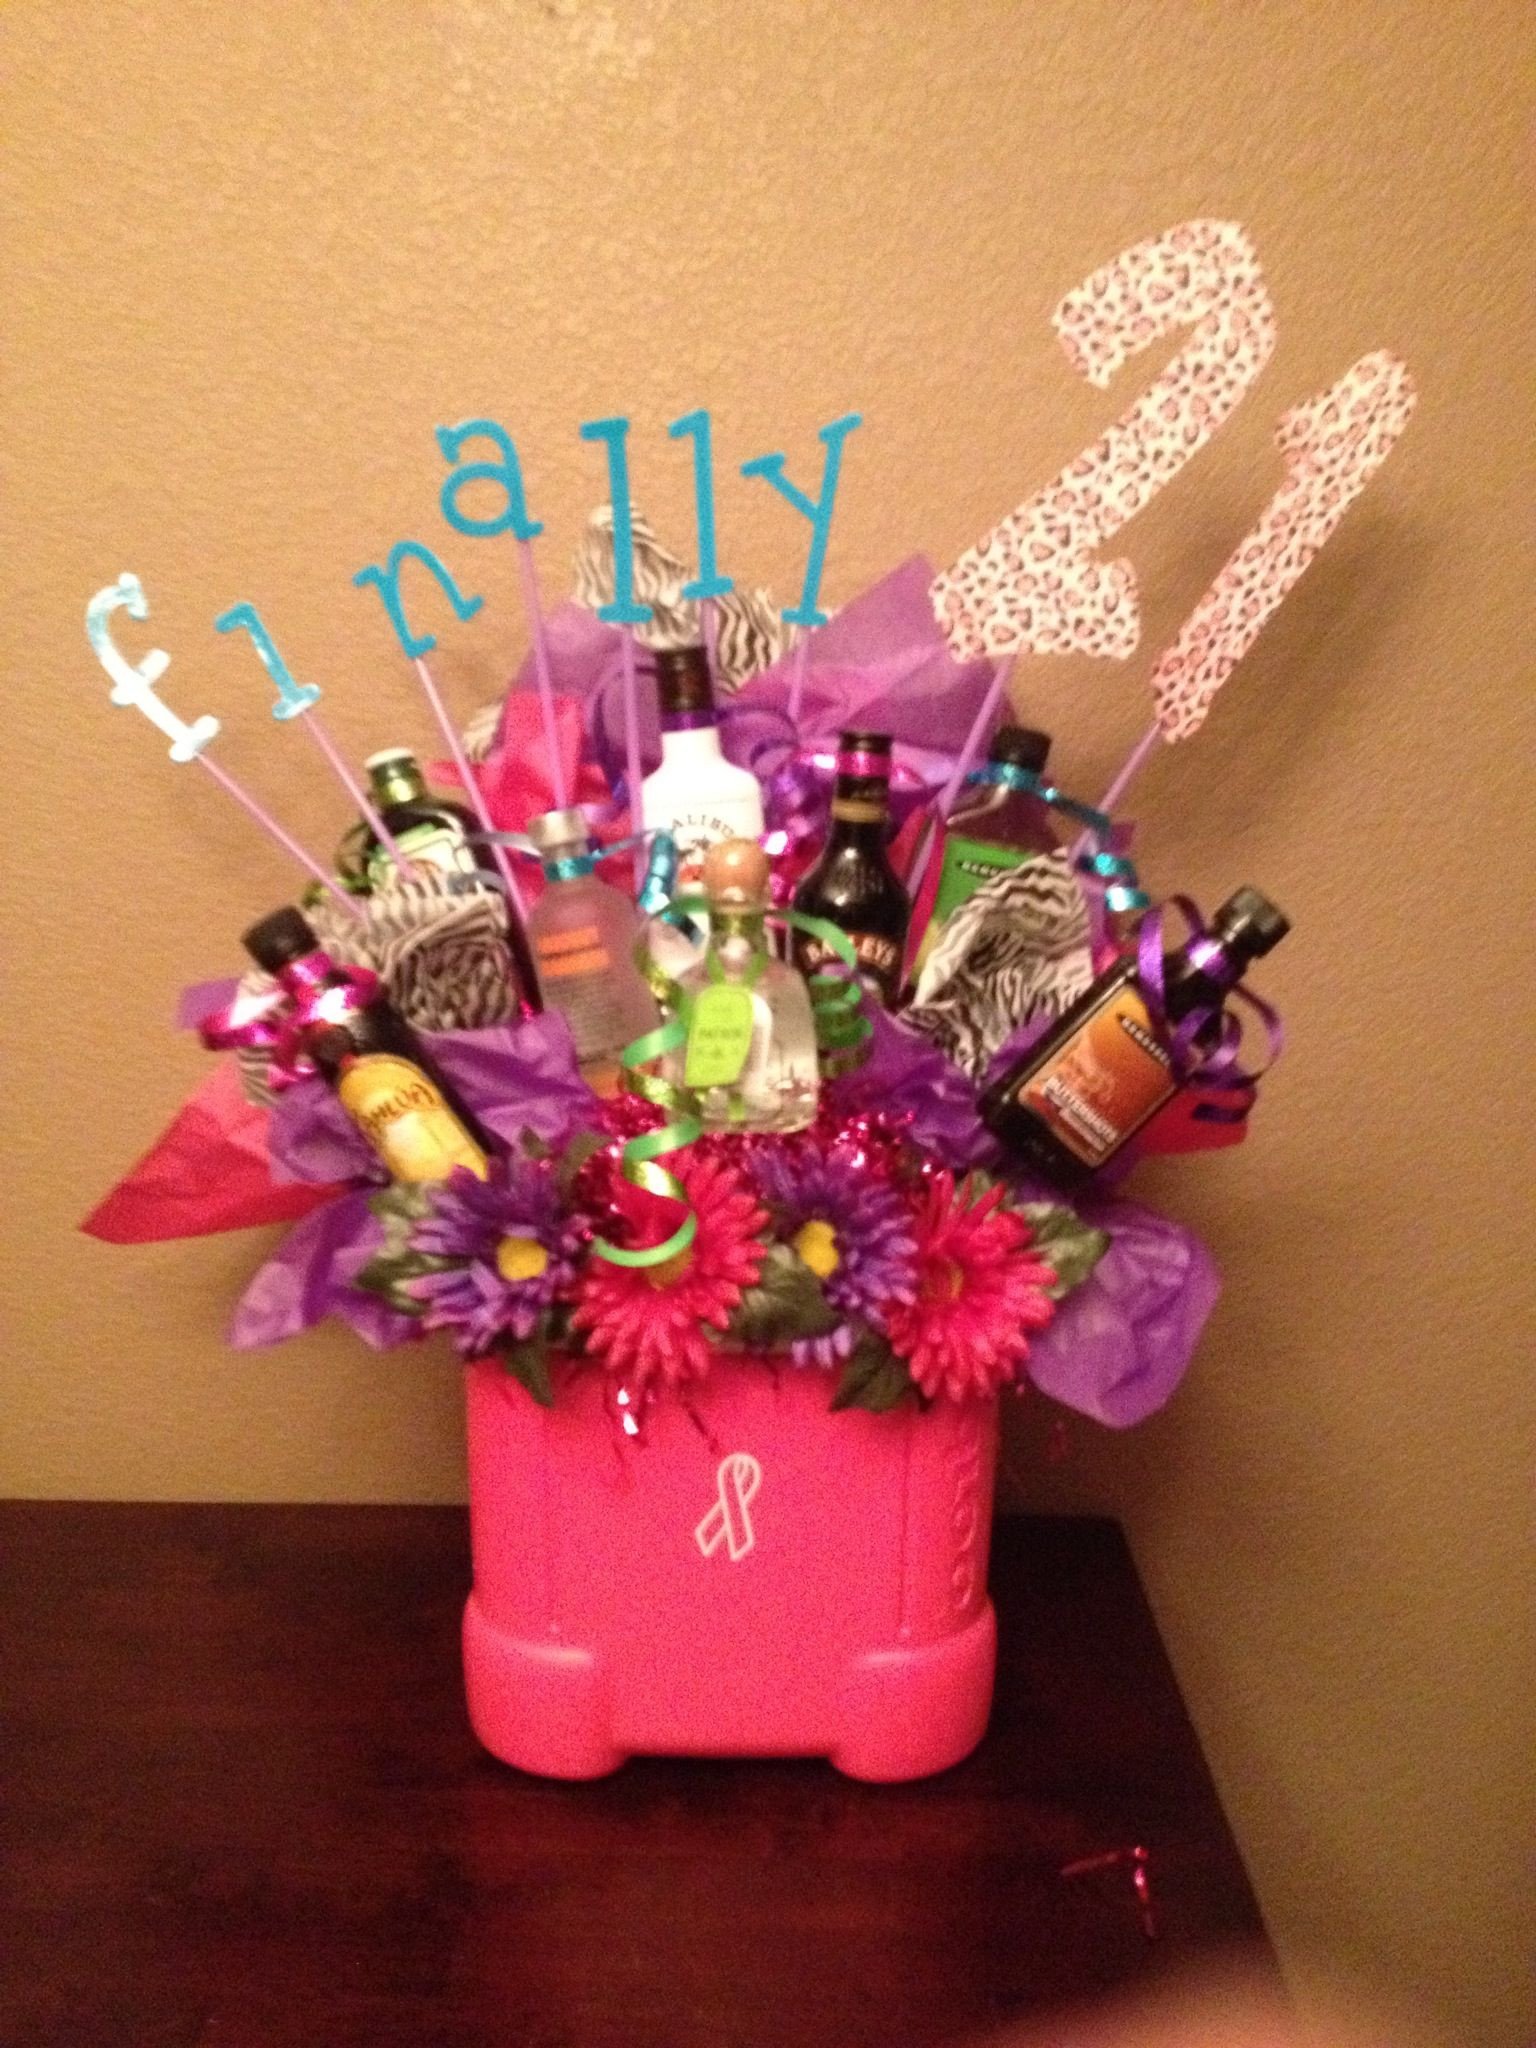 Cute 21St Birthday Gift Ideas
 Liquor bouquet great t idea for someone s 21st